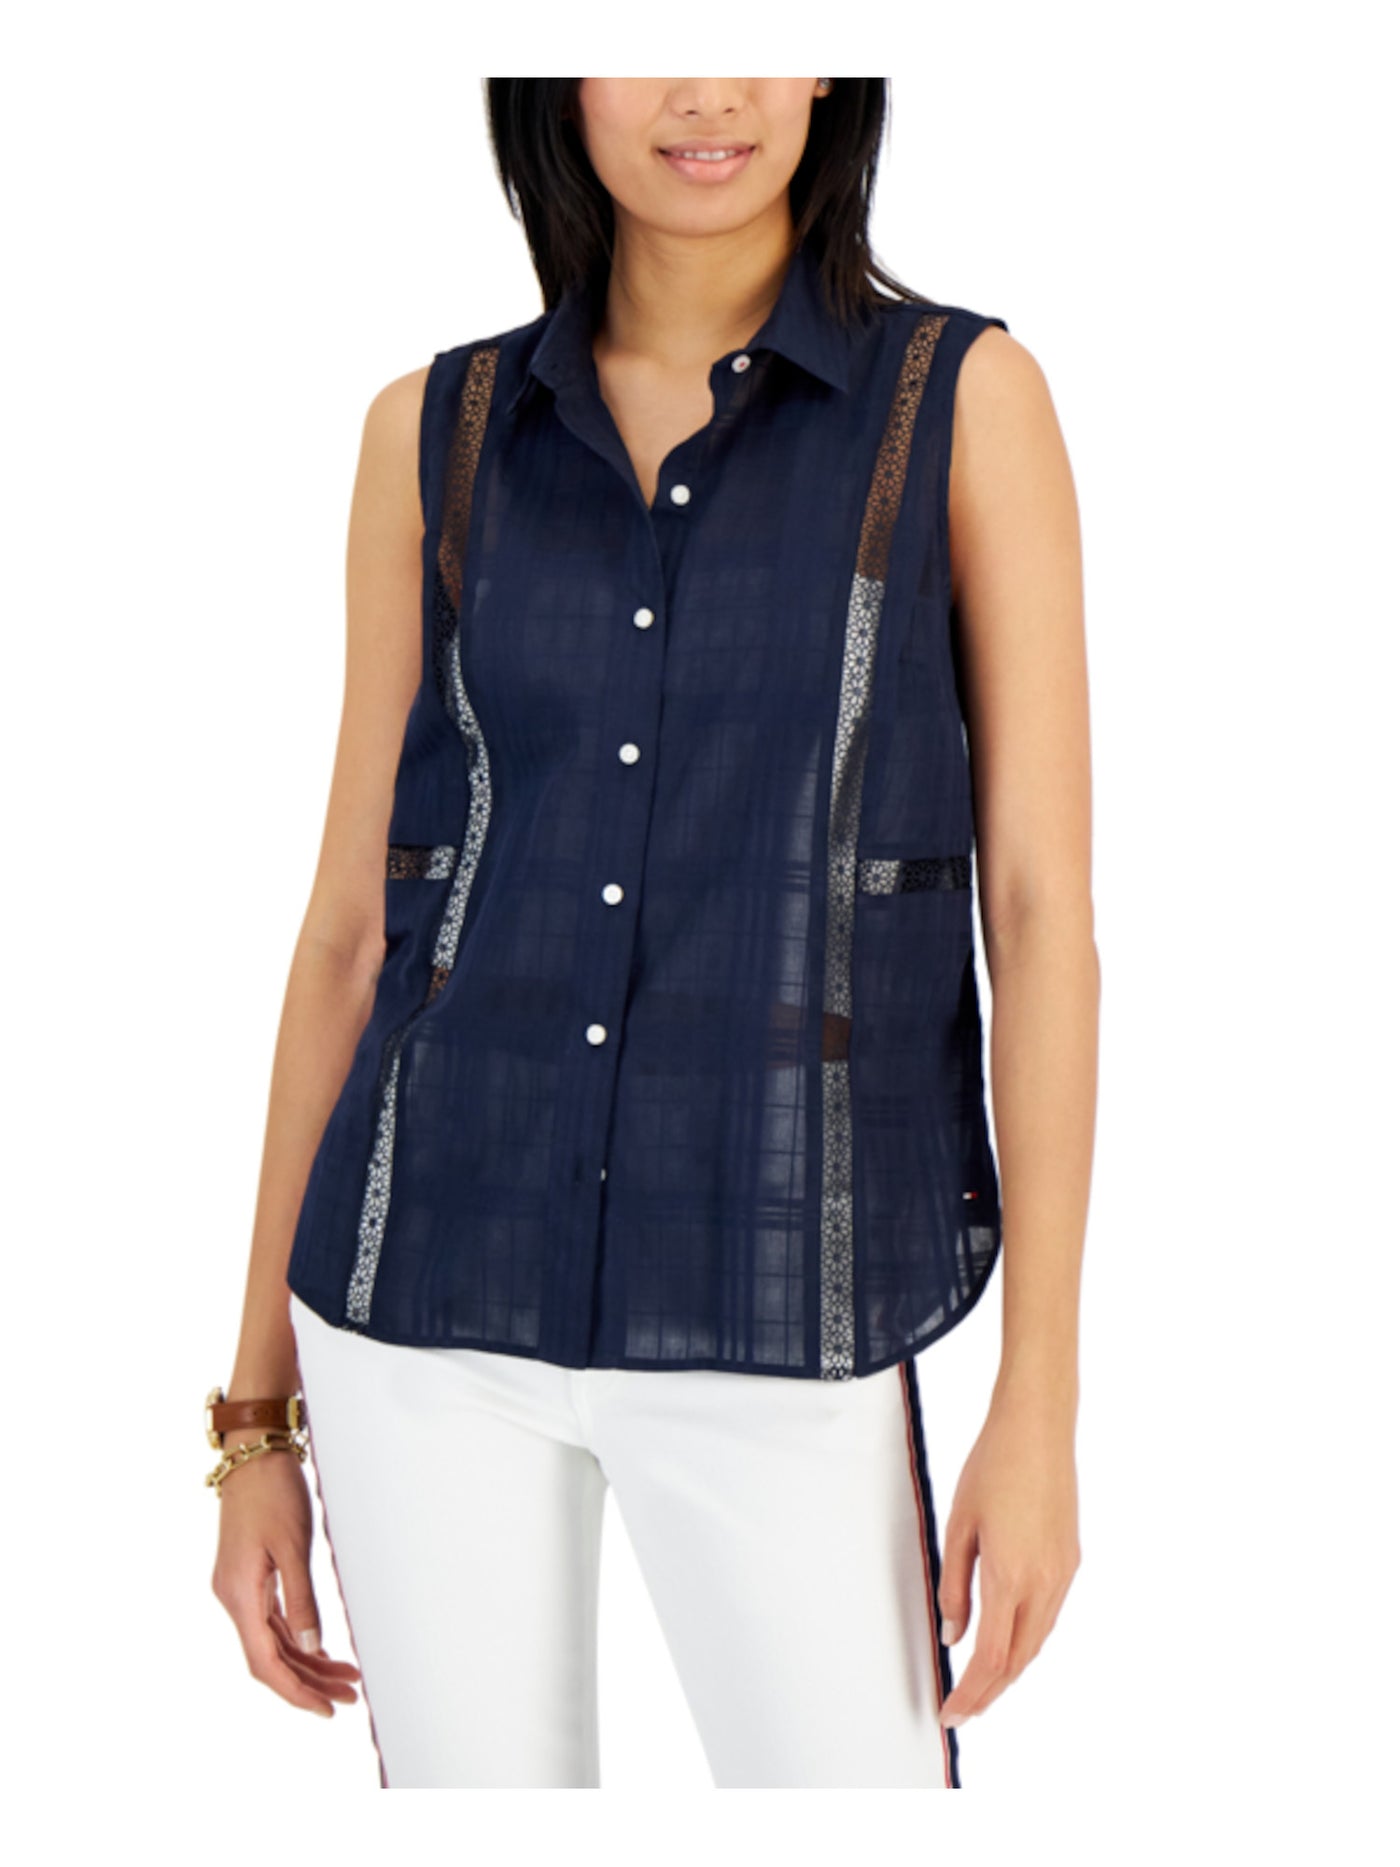 TOMMY HILFIGER Womens Navy Sleeveless Point Collar Button Up Top XS